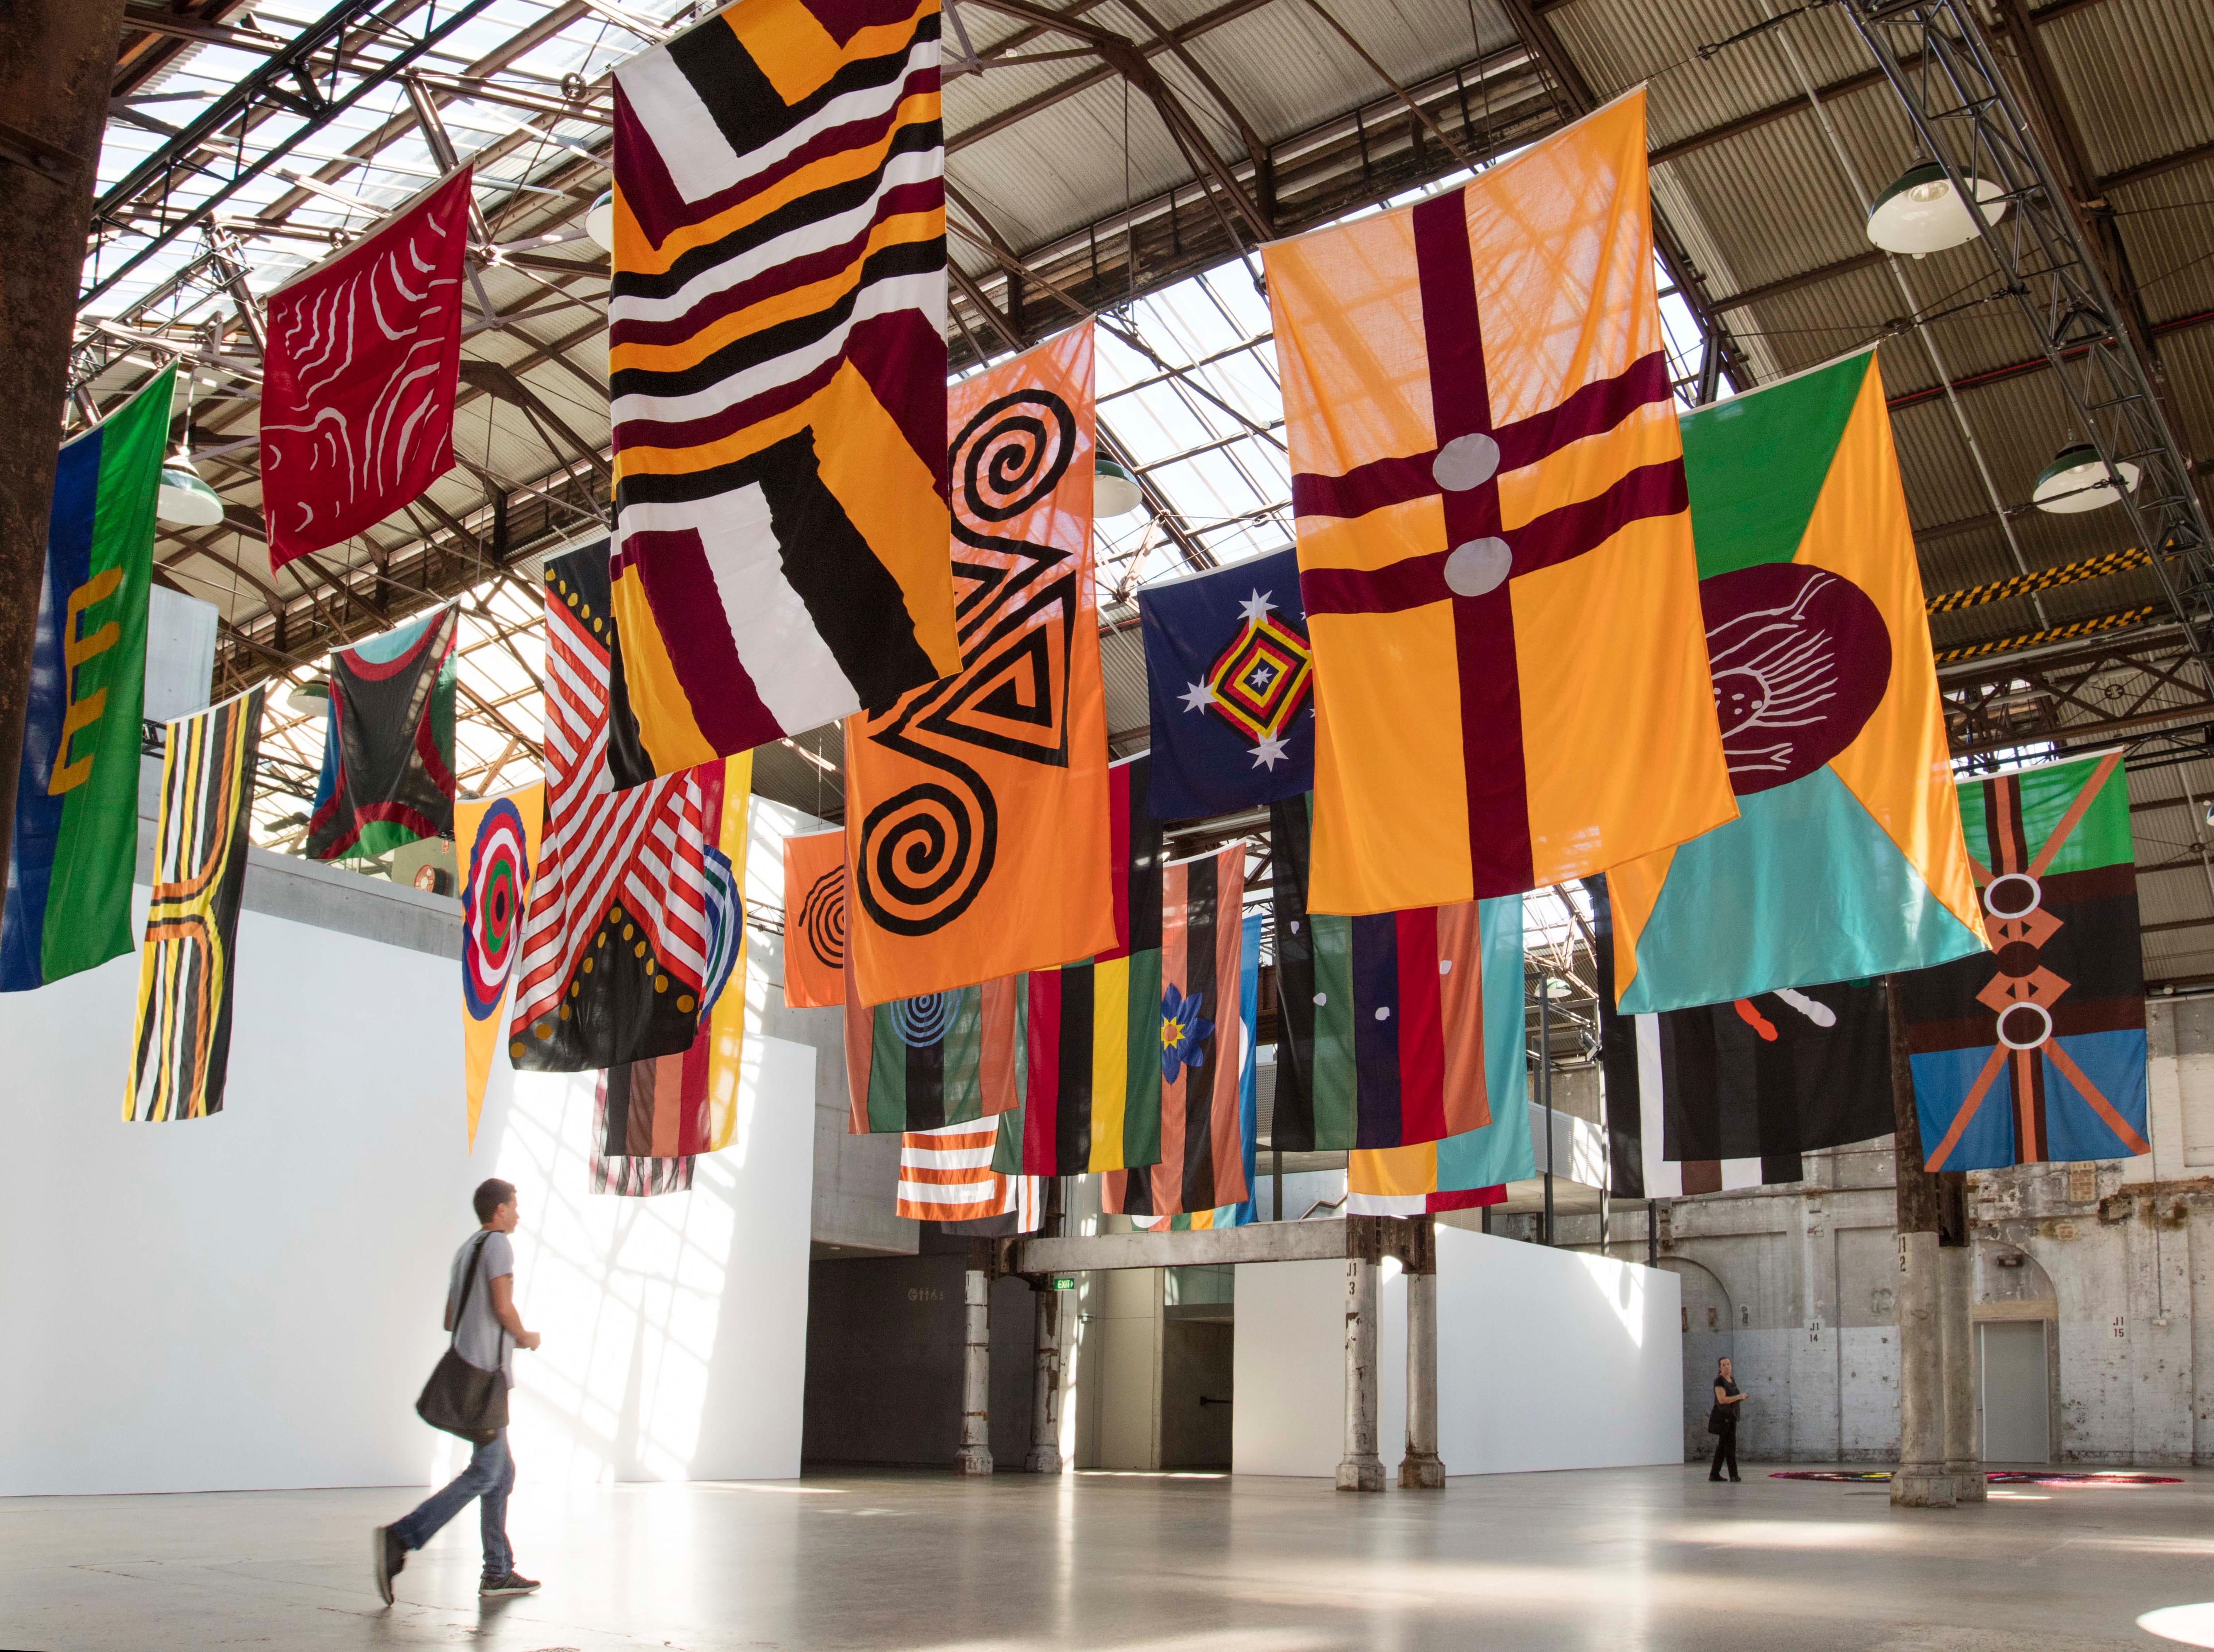 A series of colourful flags depicting First Nations designs and symbols hang from the ceiling of a industrial gallery space.